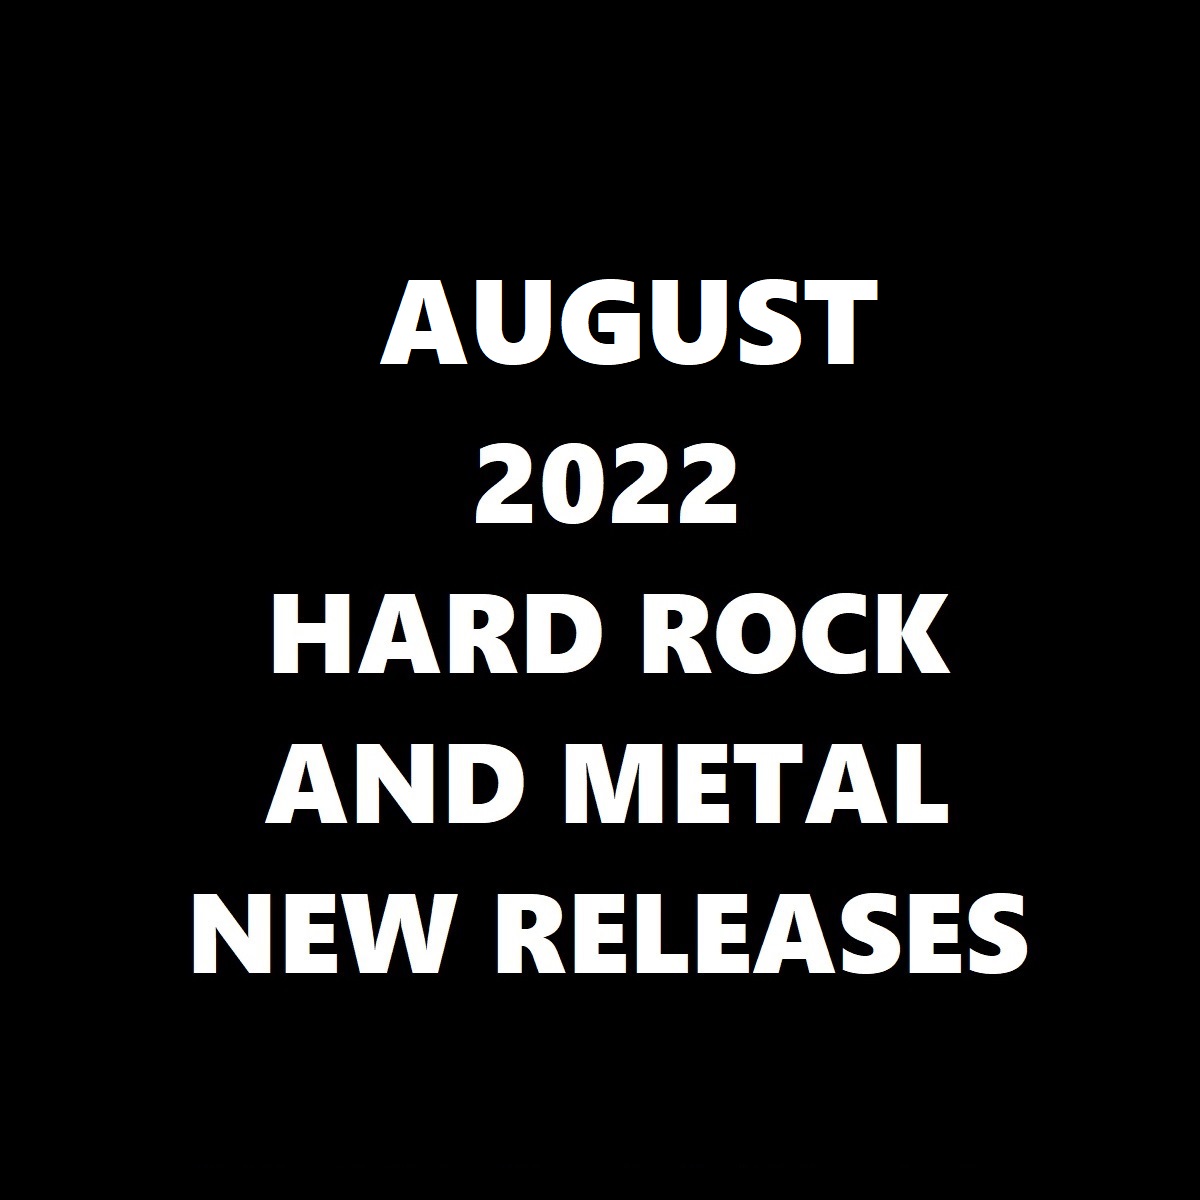 Hard Rock And Metal New Release For August 2022